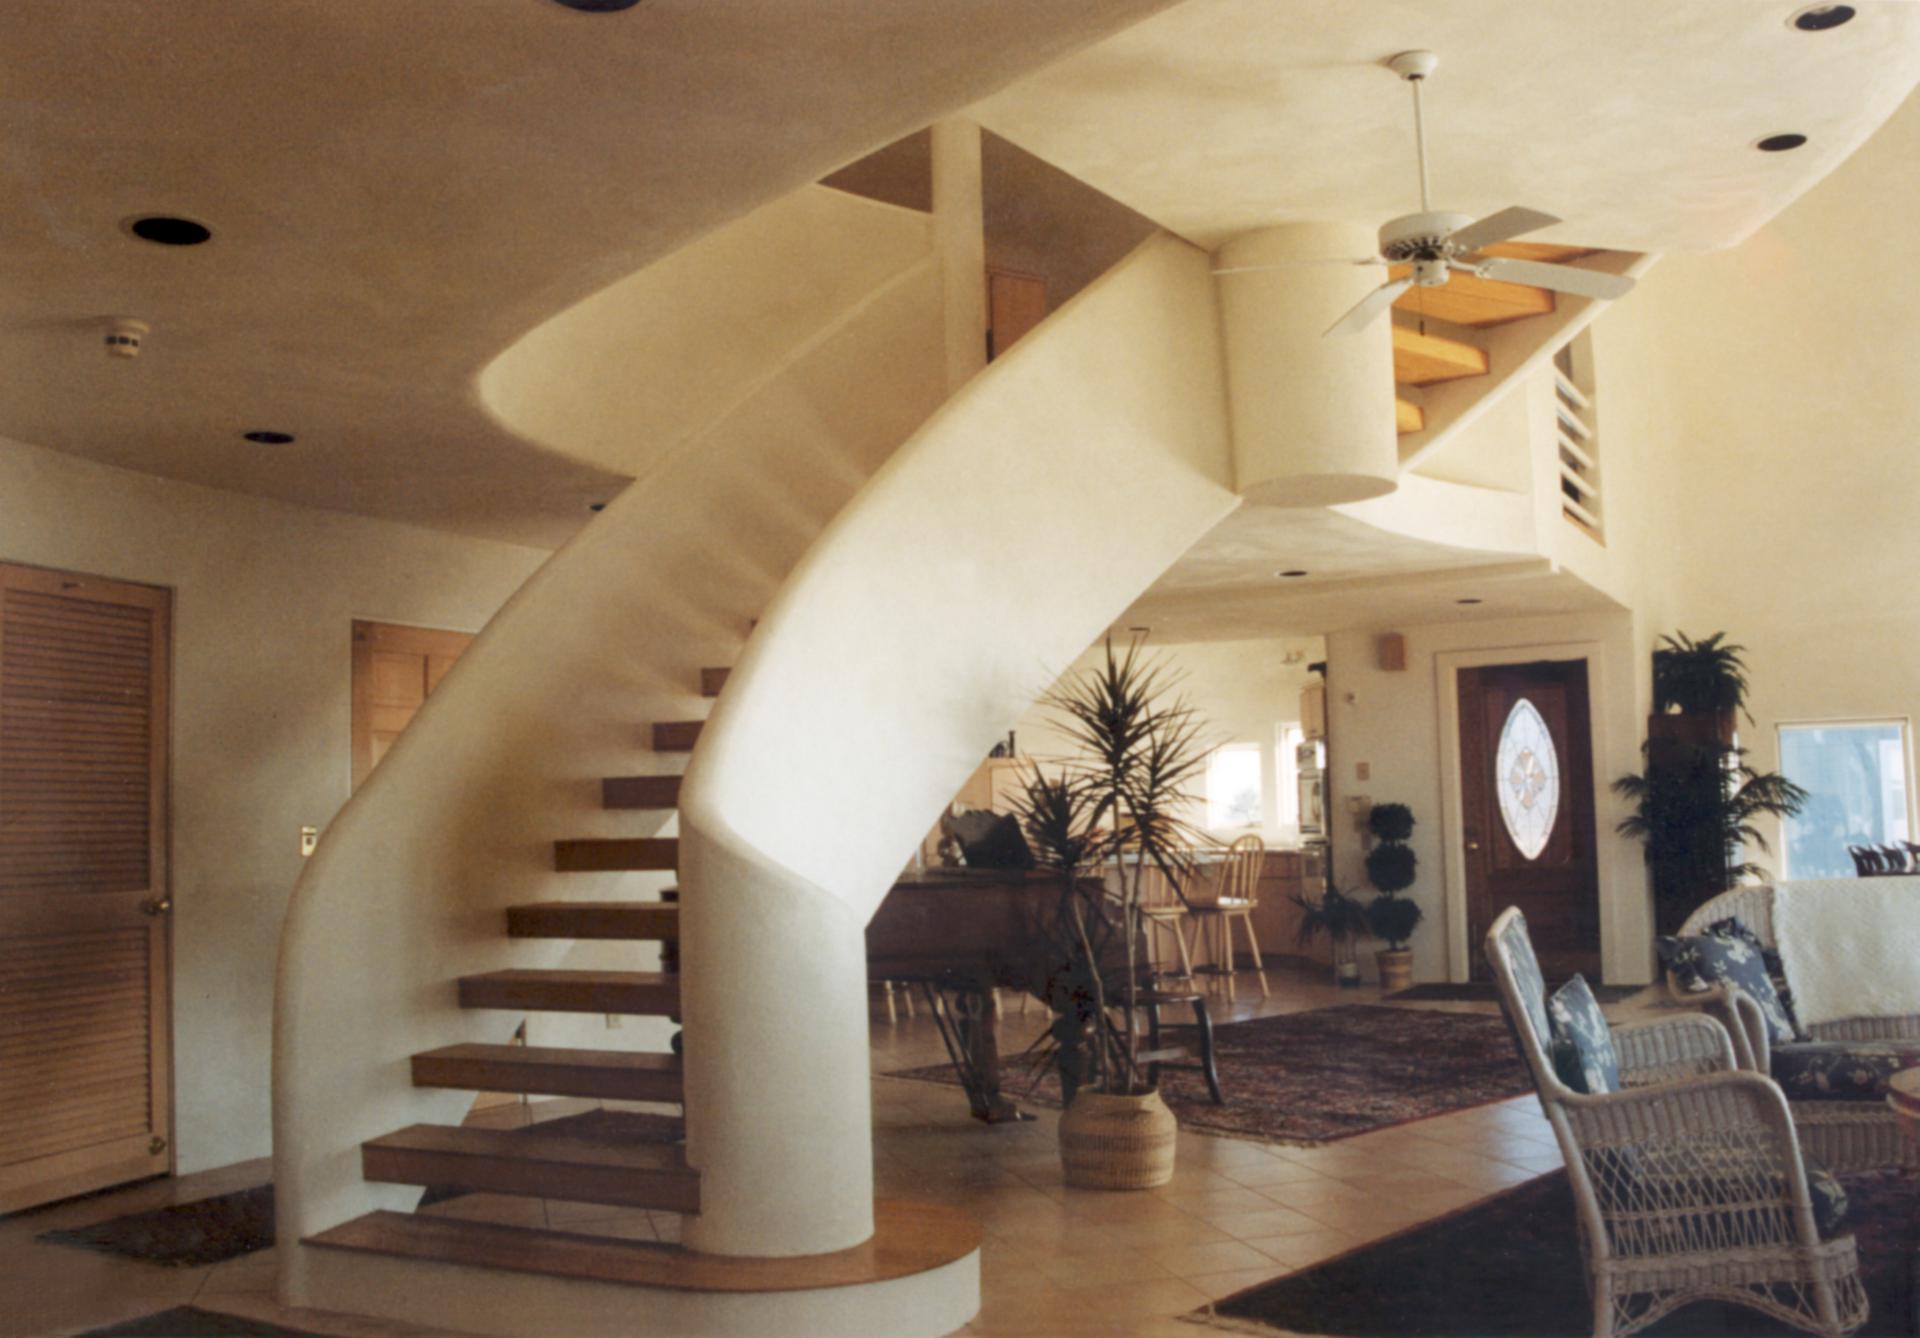 Curved stairway